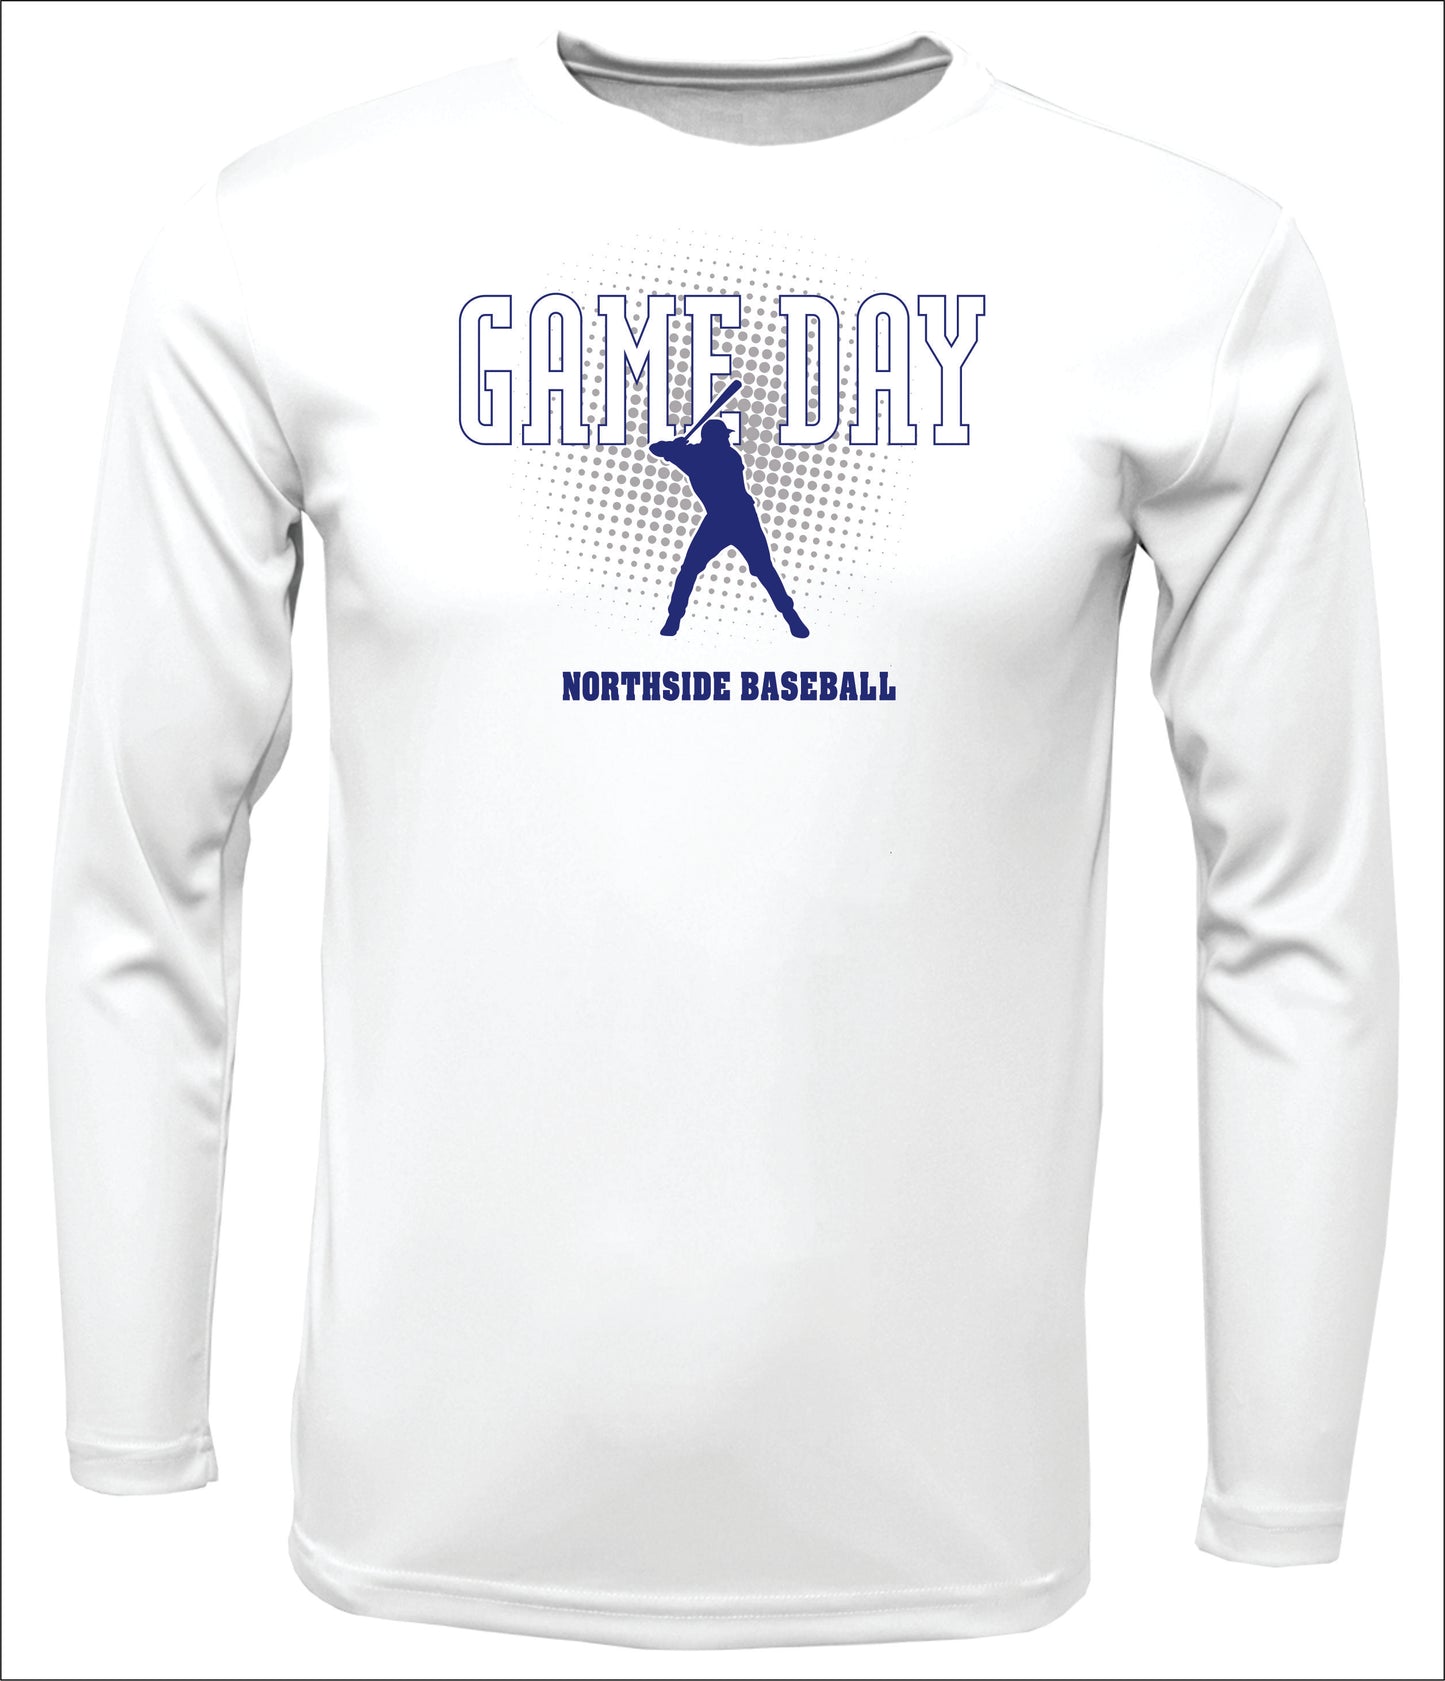 Northside "Game Day" Long-Sleeve Dri-Fit T-shirt